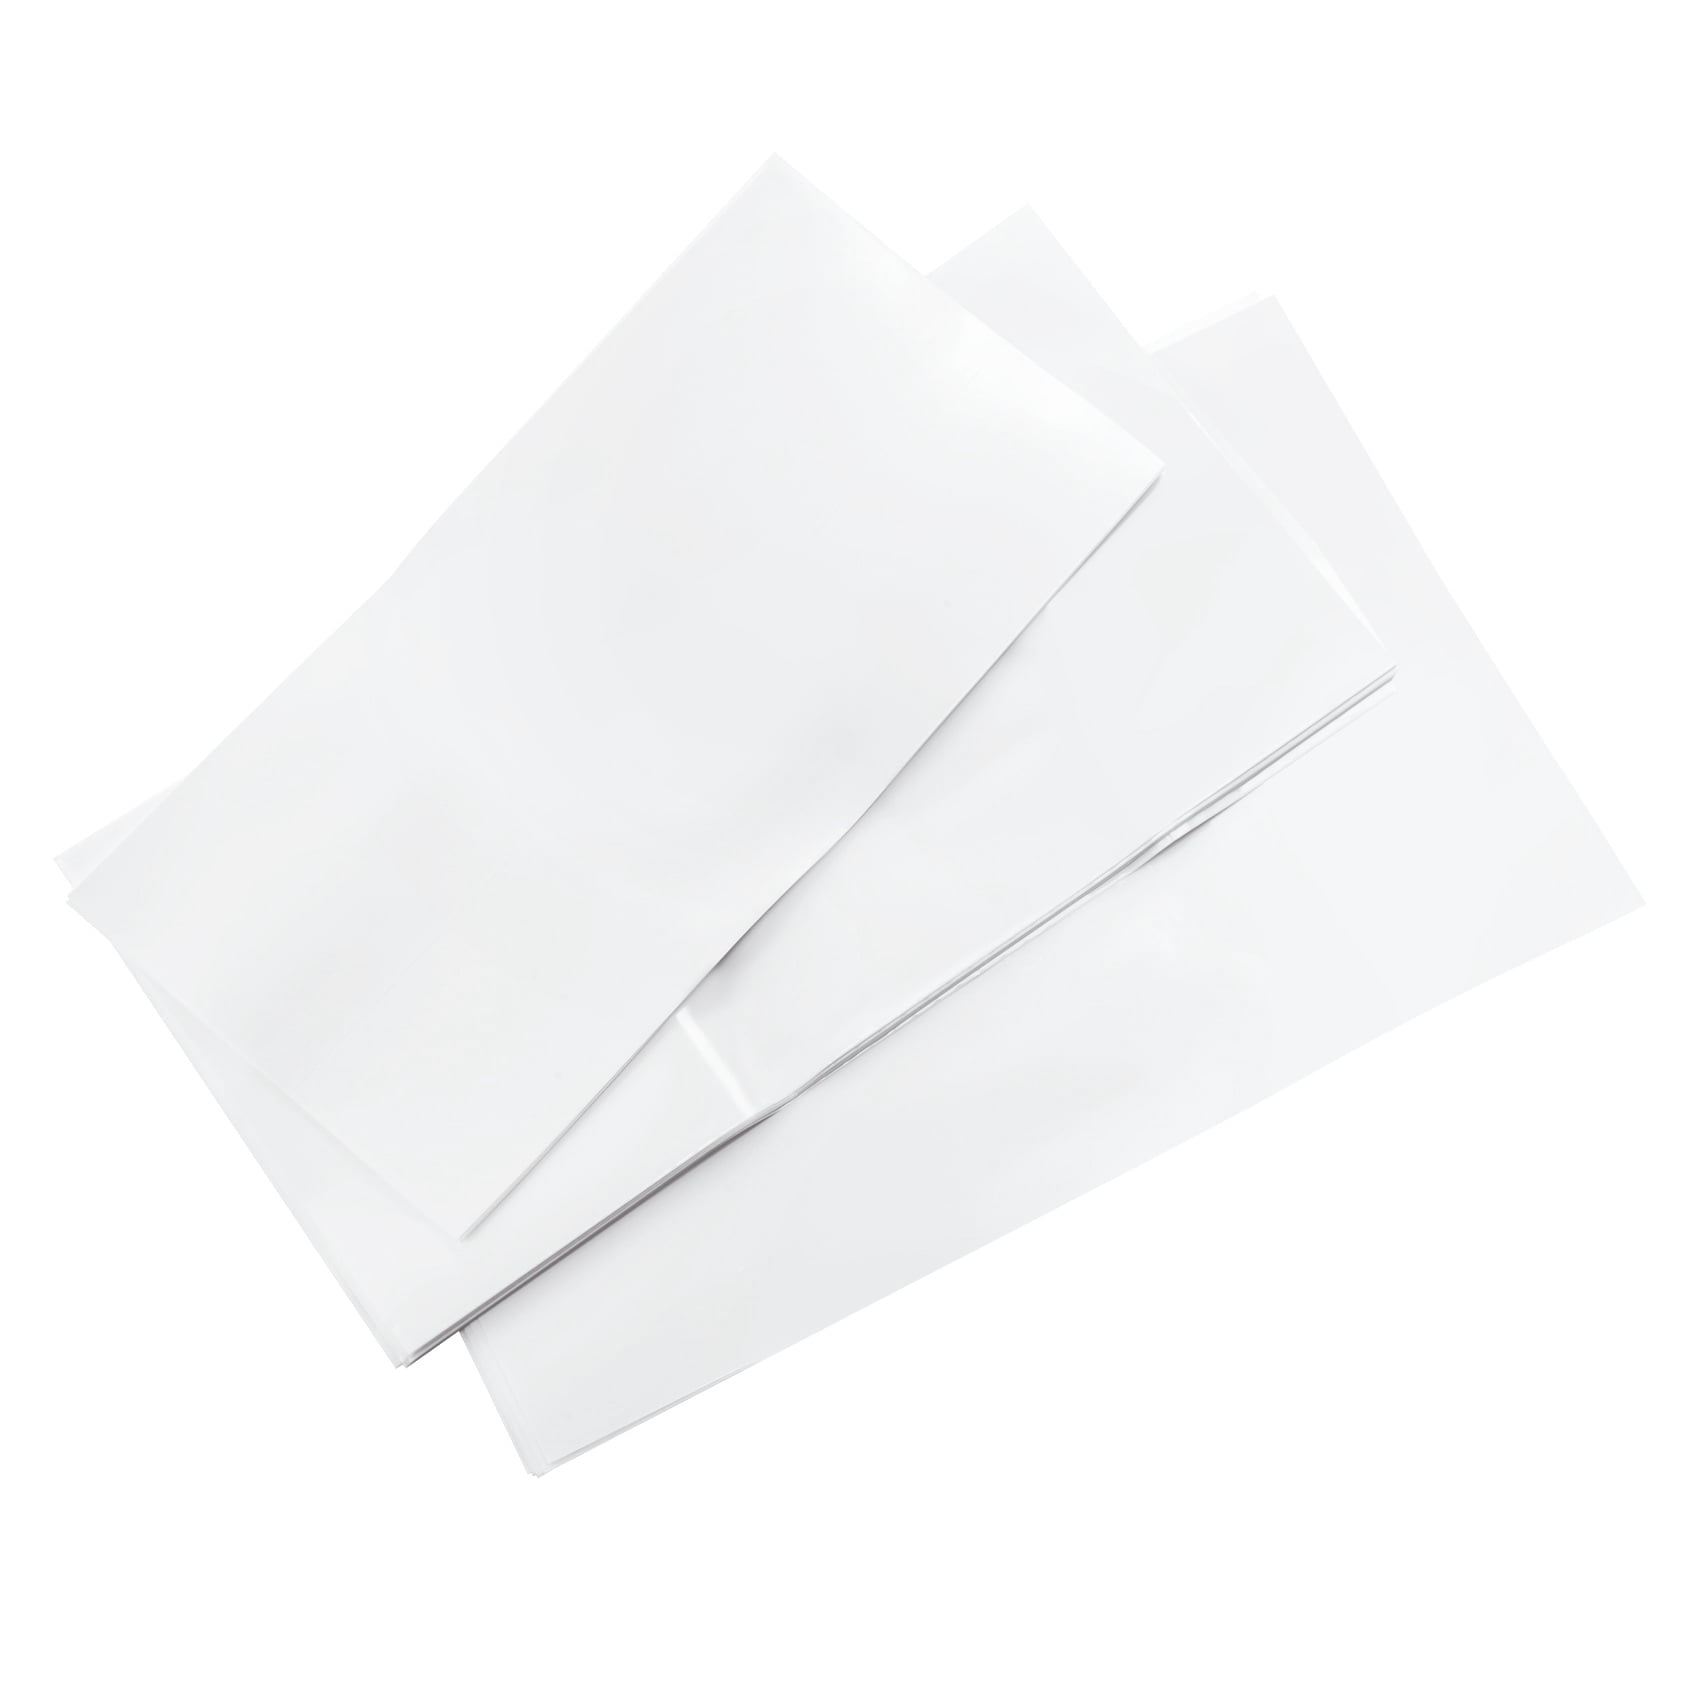 30pcs White Heat Shrink Film Paper Sheets for DIY Crafts Jewelry Making 